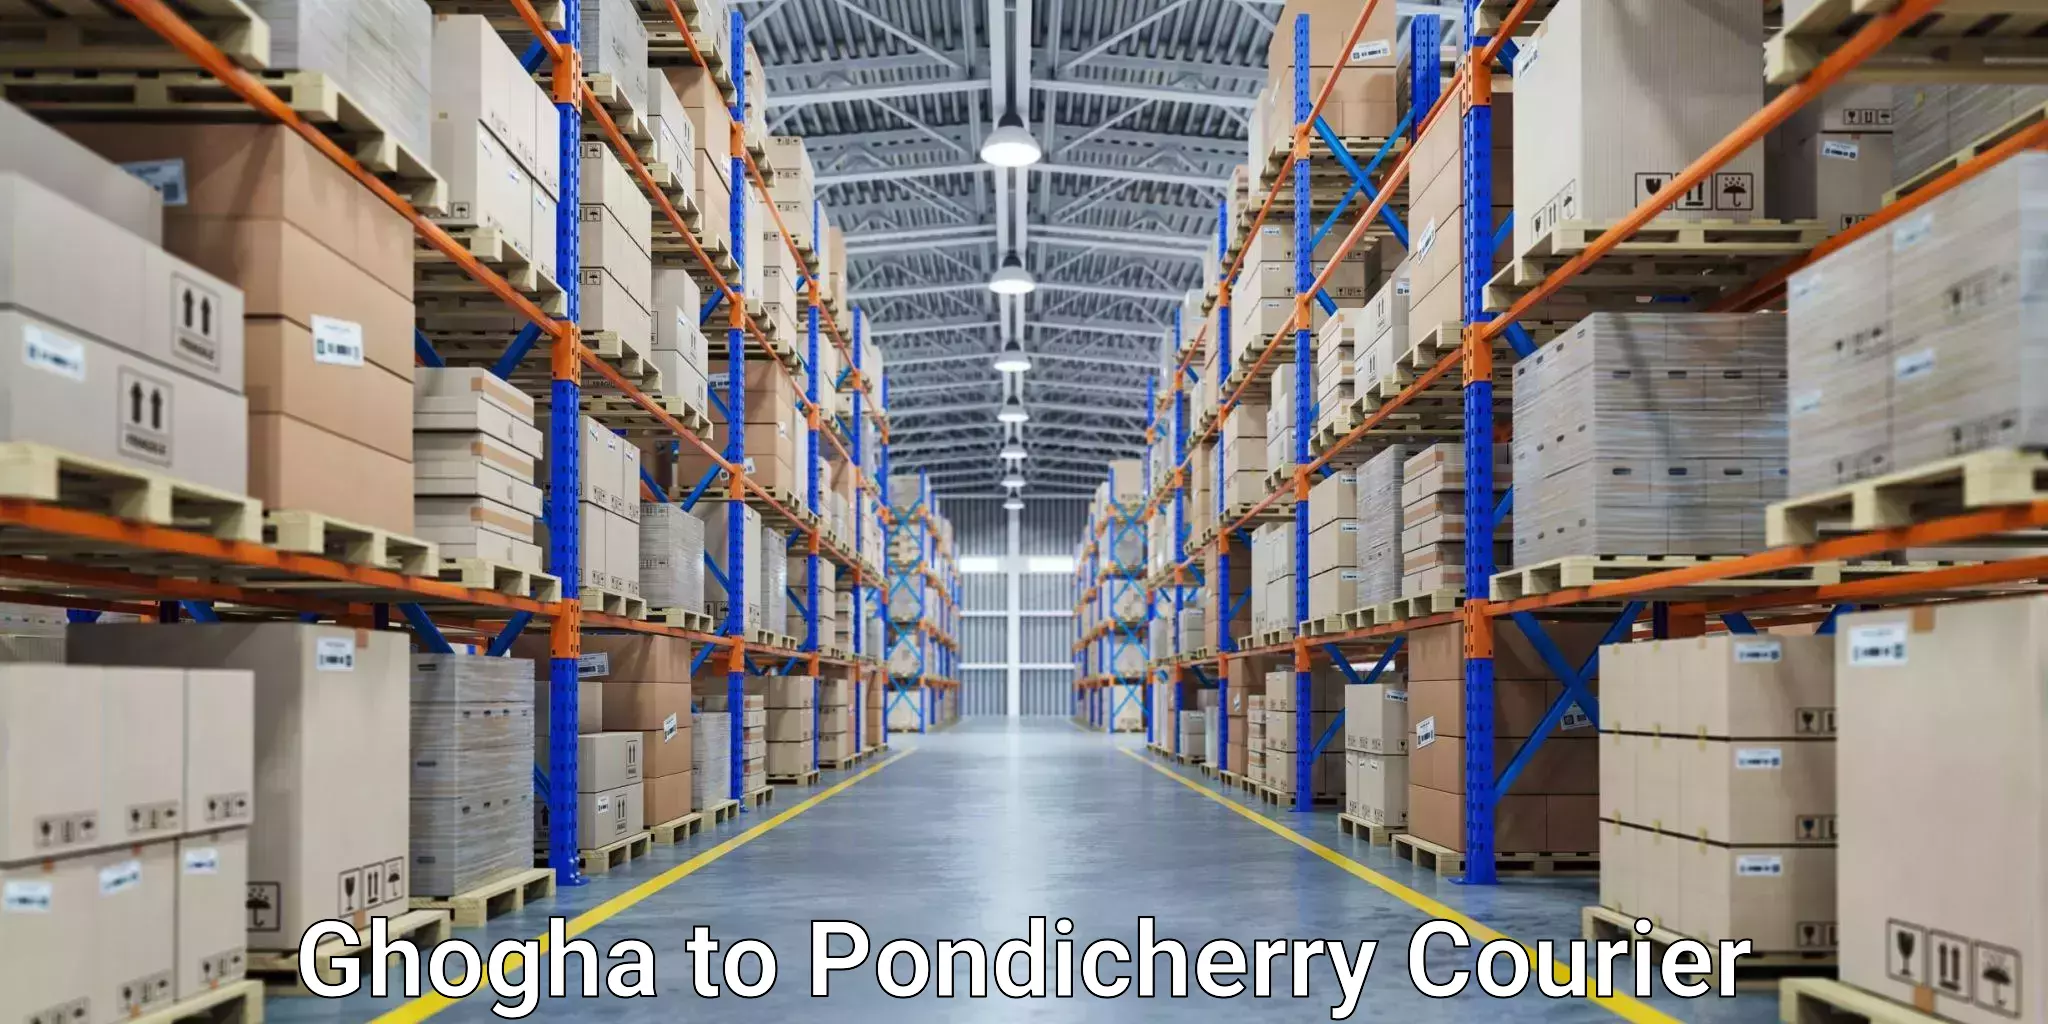 Tailored shipping plans in Ghogha to Pondicherry